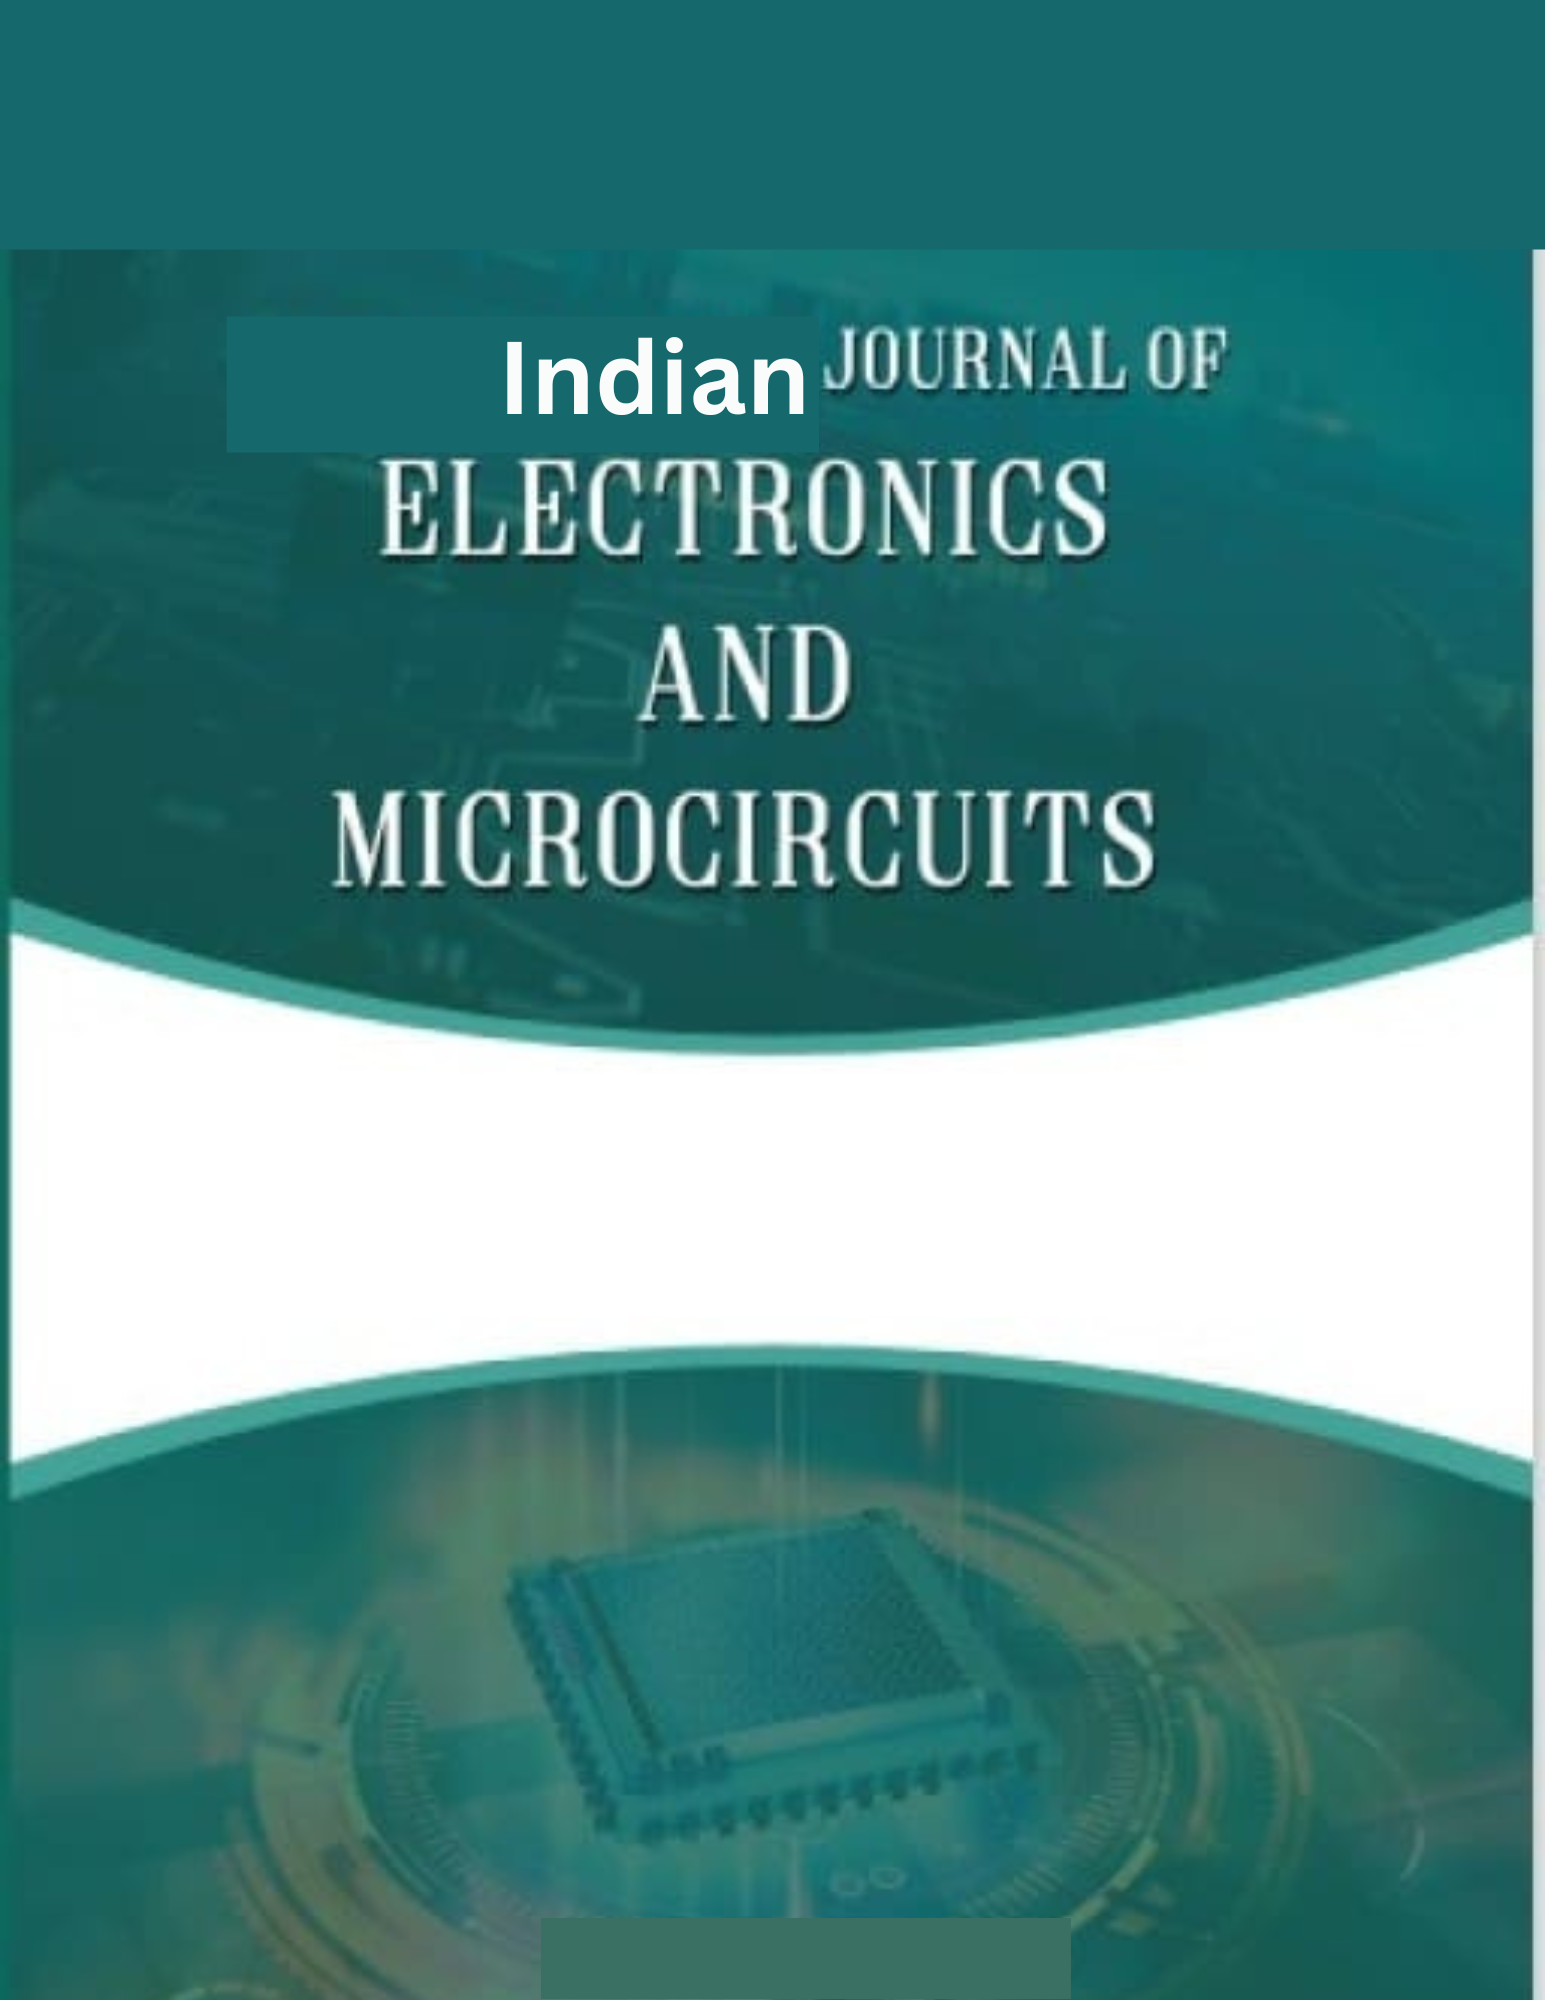 Indian Journal of Electronics and Microcircuits